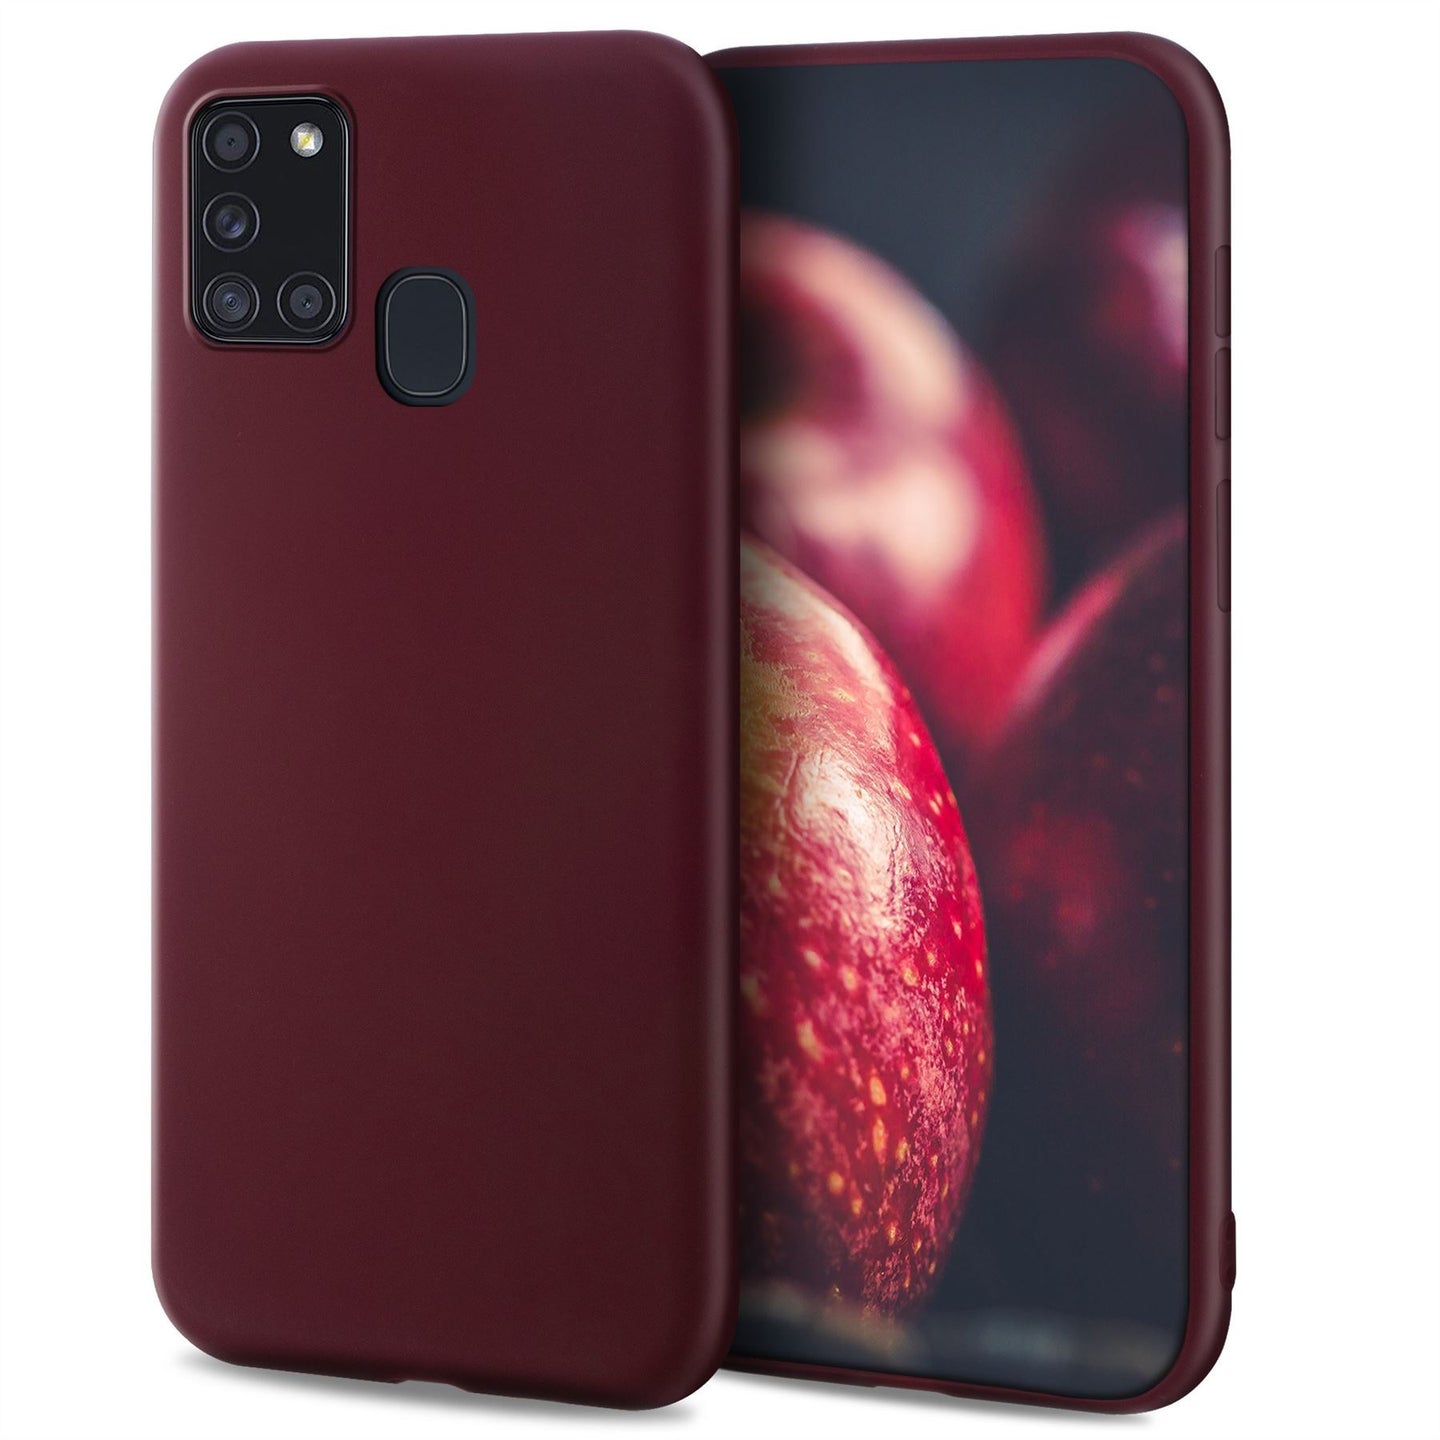 Moozy Minimalist Series Silicone Case for Samsung A21s, Wine Red - Matte Finish Slim Soft TPU Cover